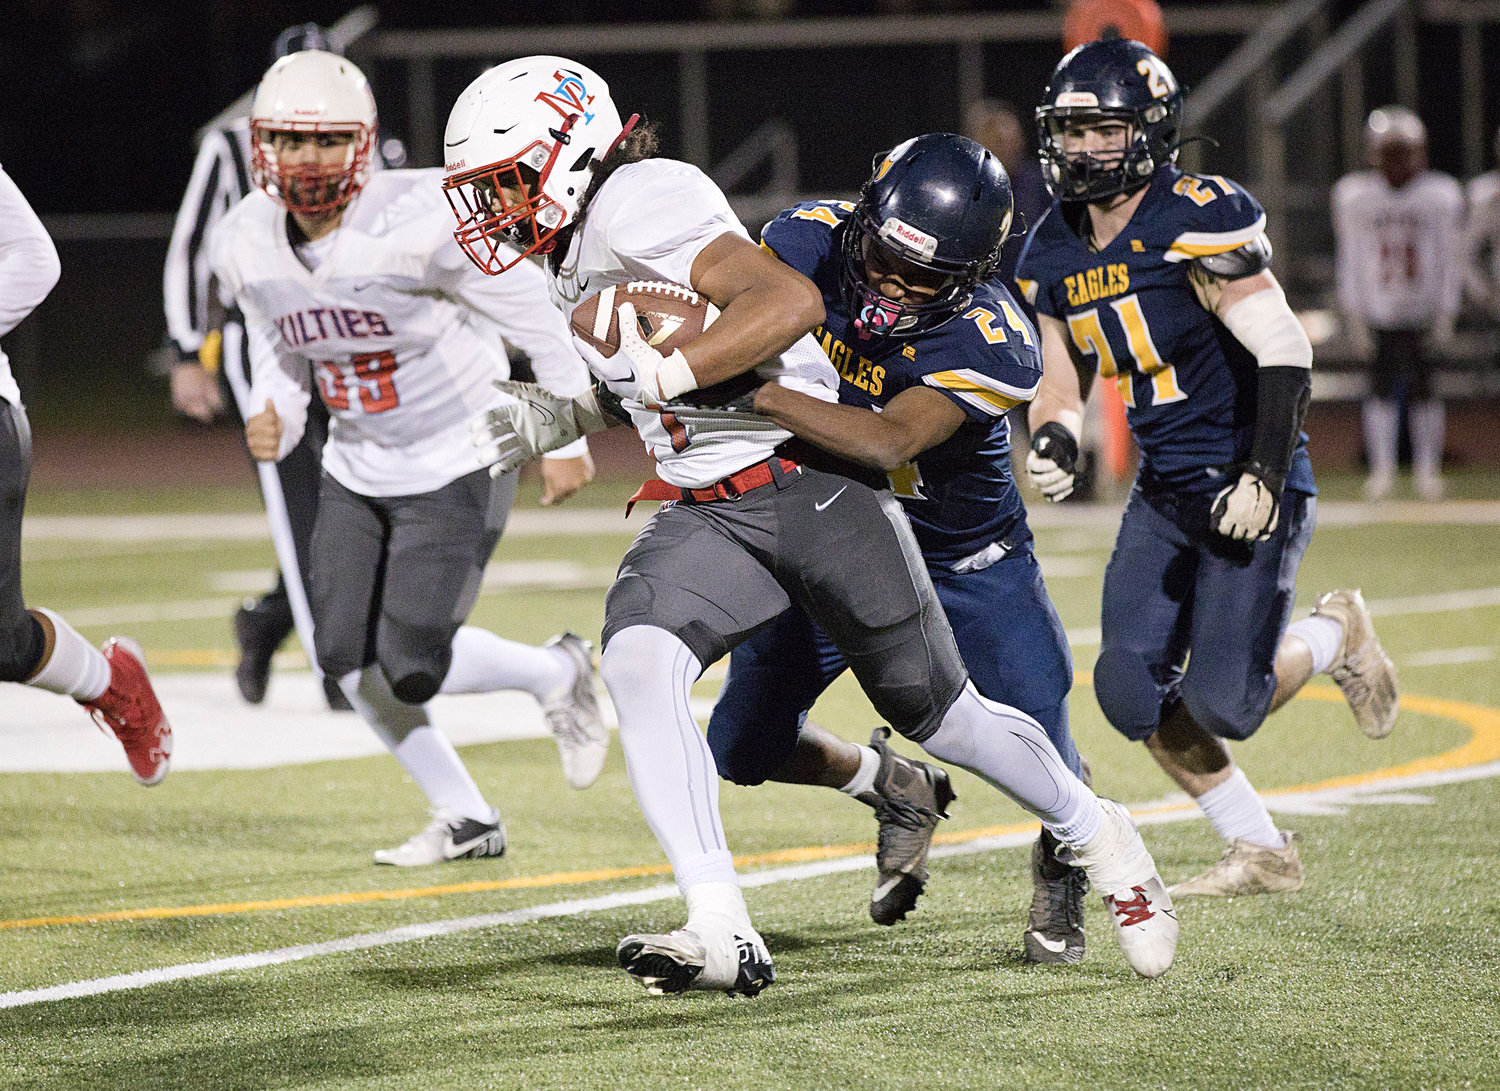 Charly Potter VI stops a Mt. Pleasant running back from advancing.